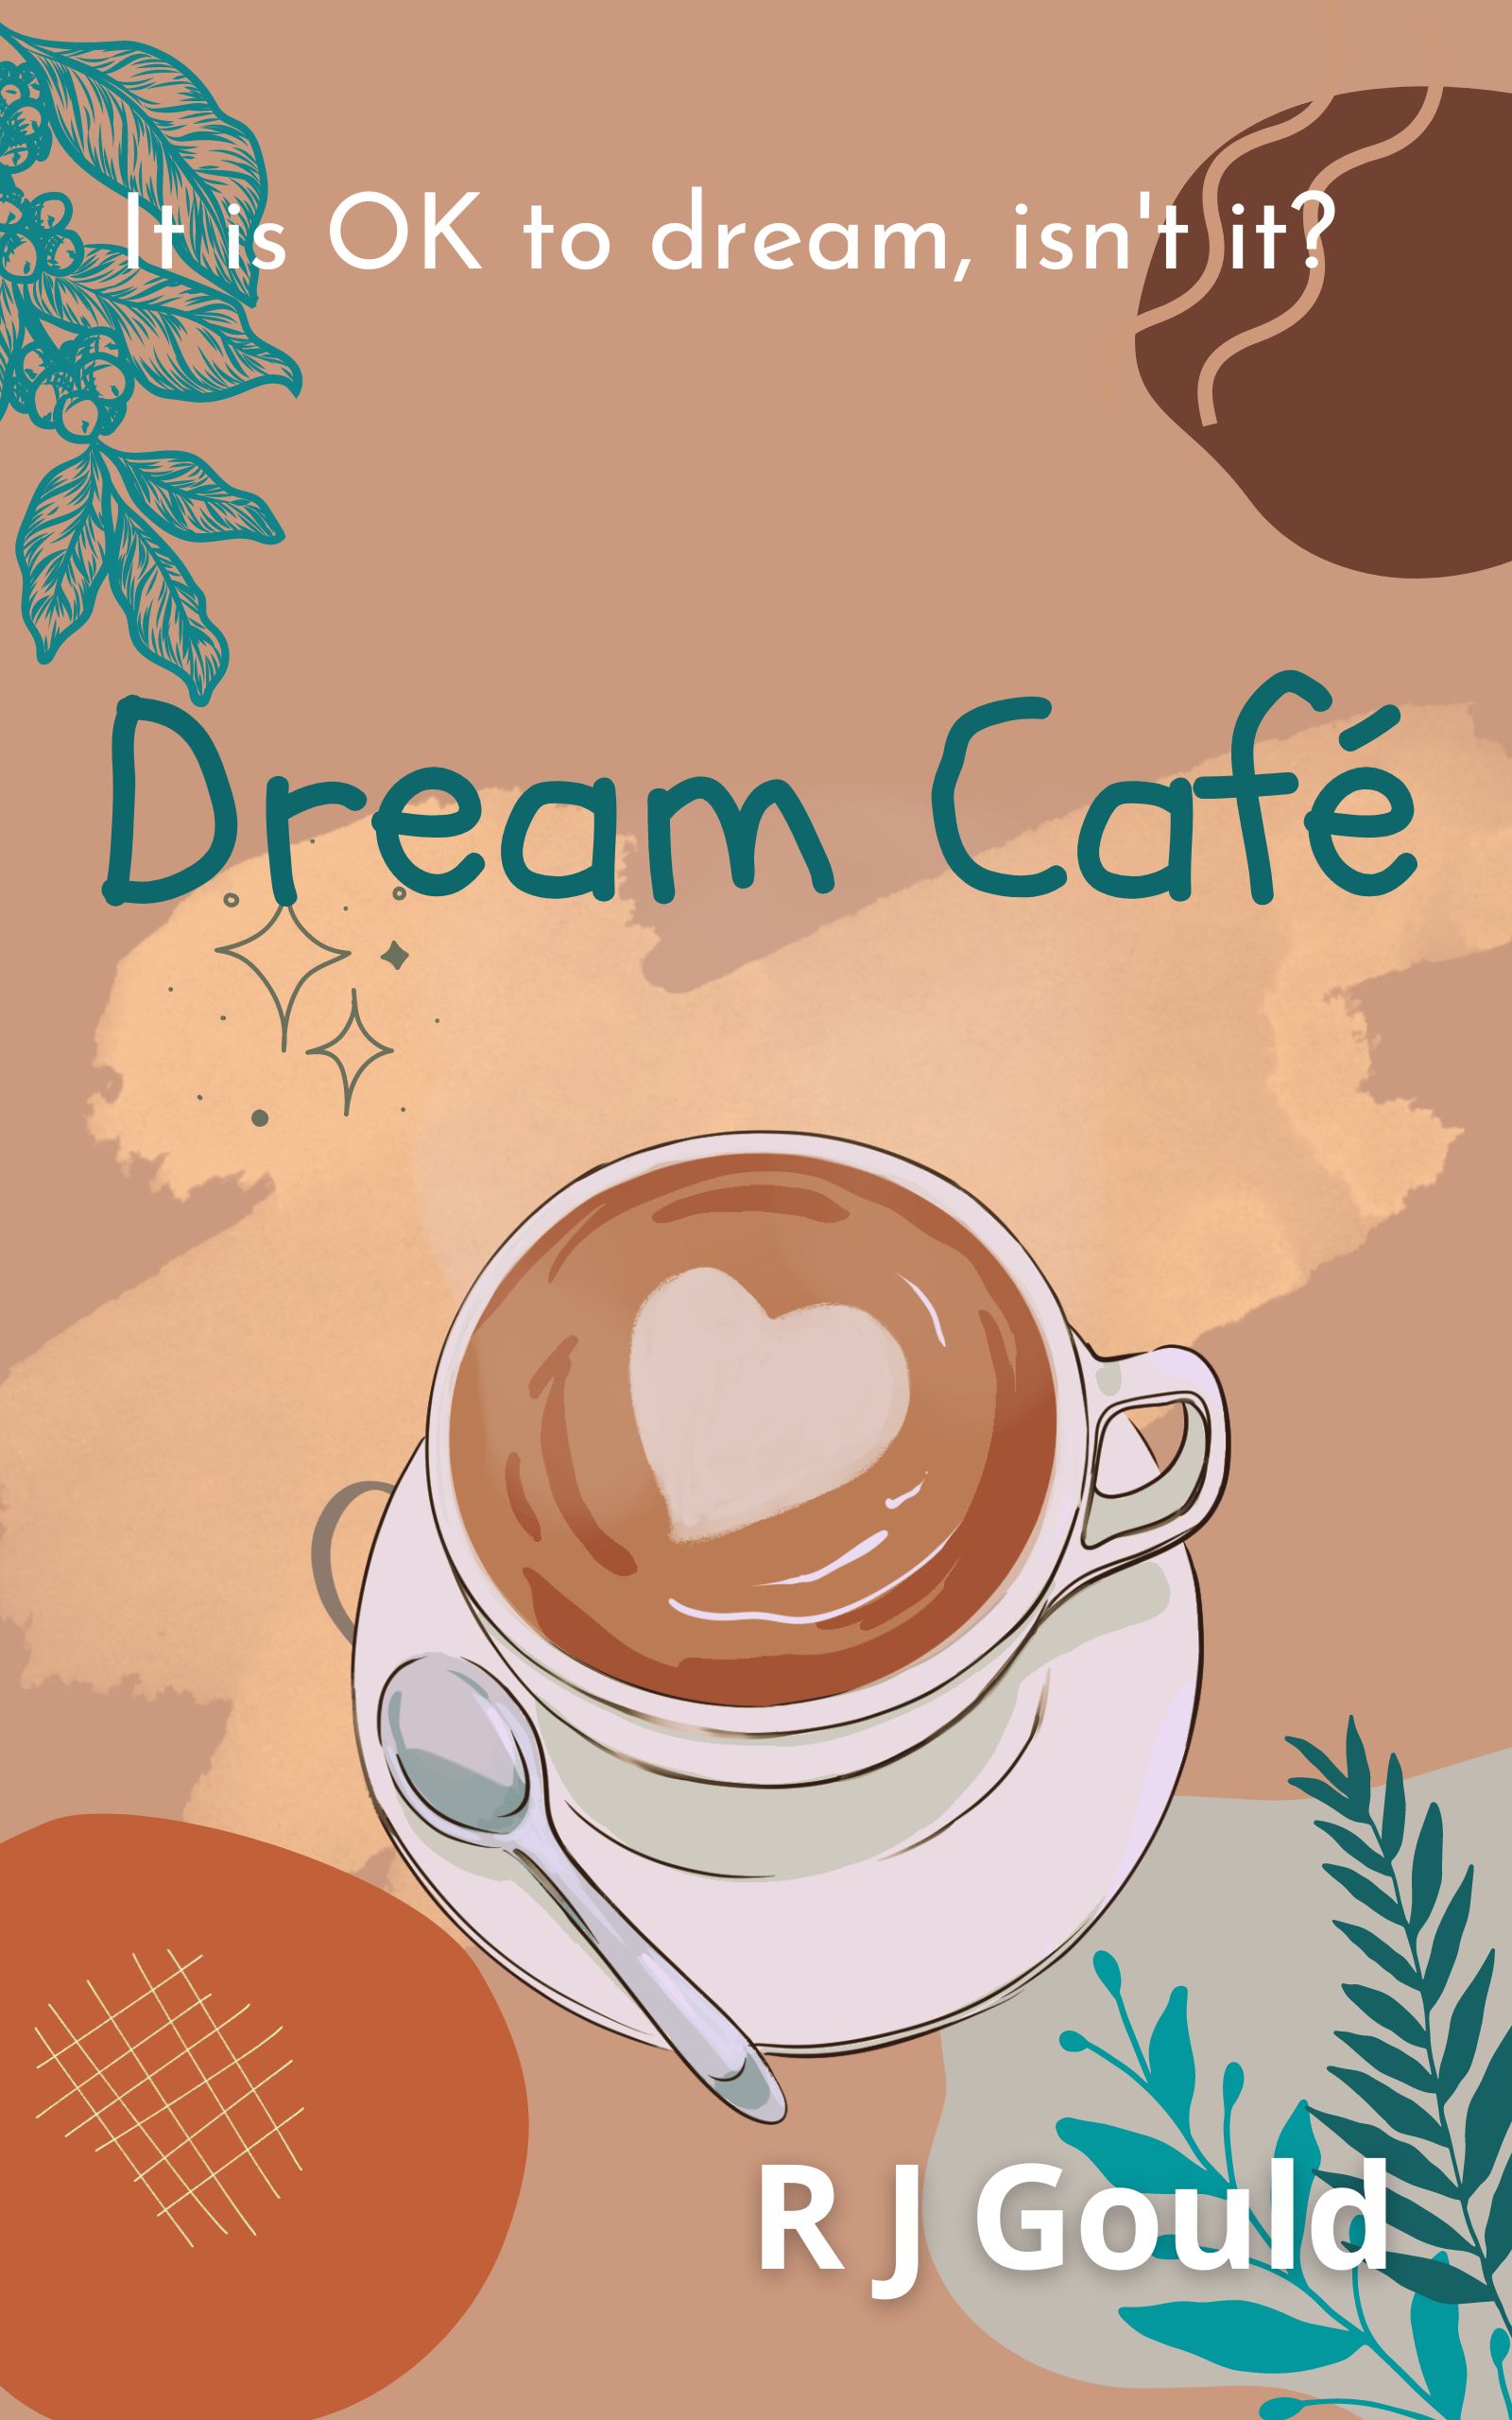 Dream Cafe by RJ Gould